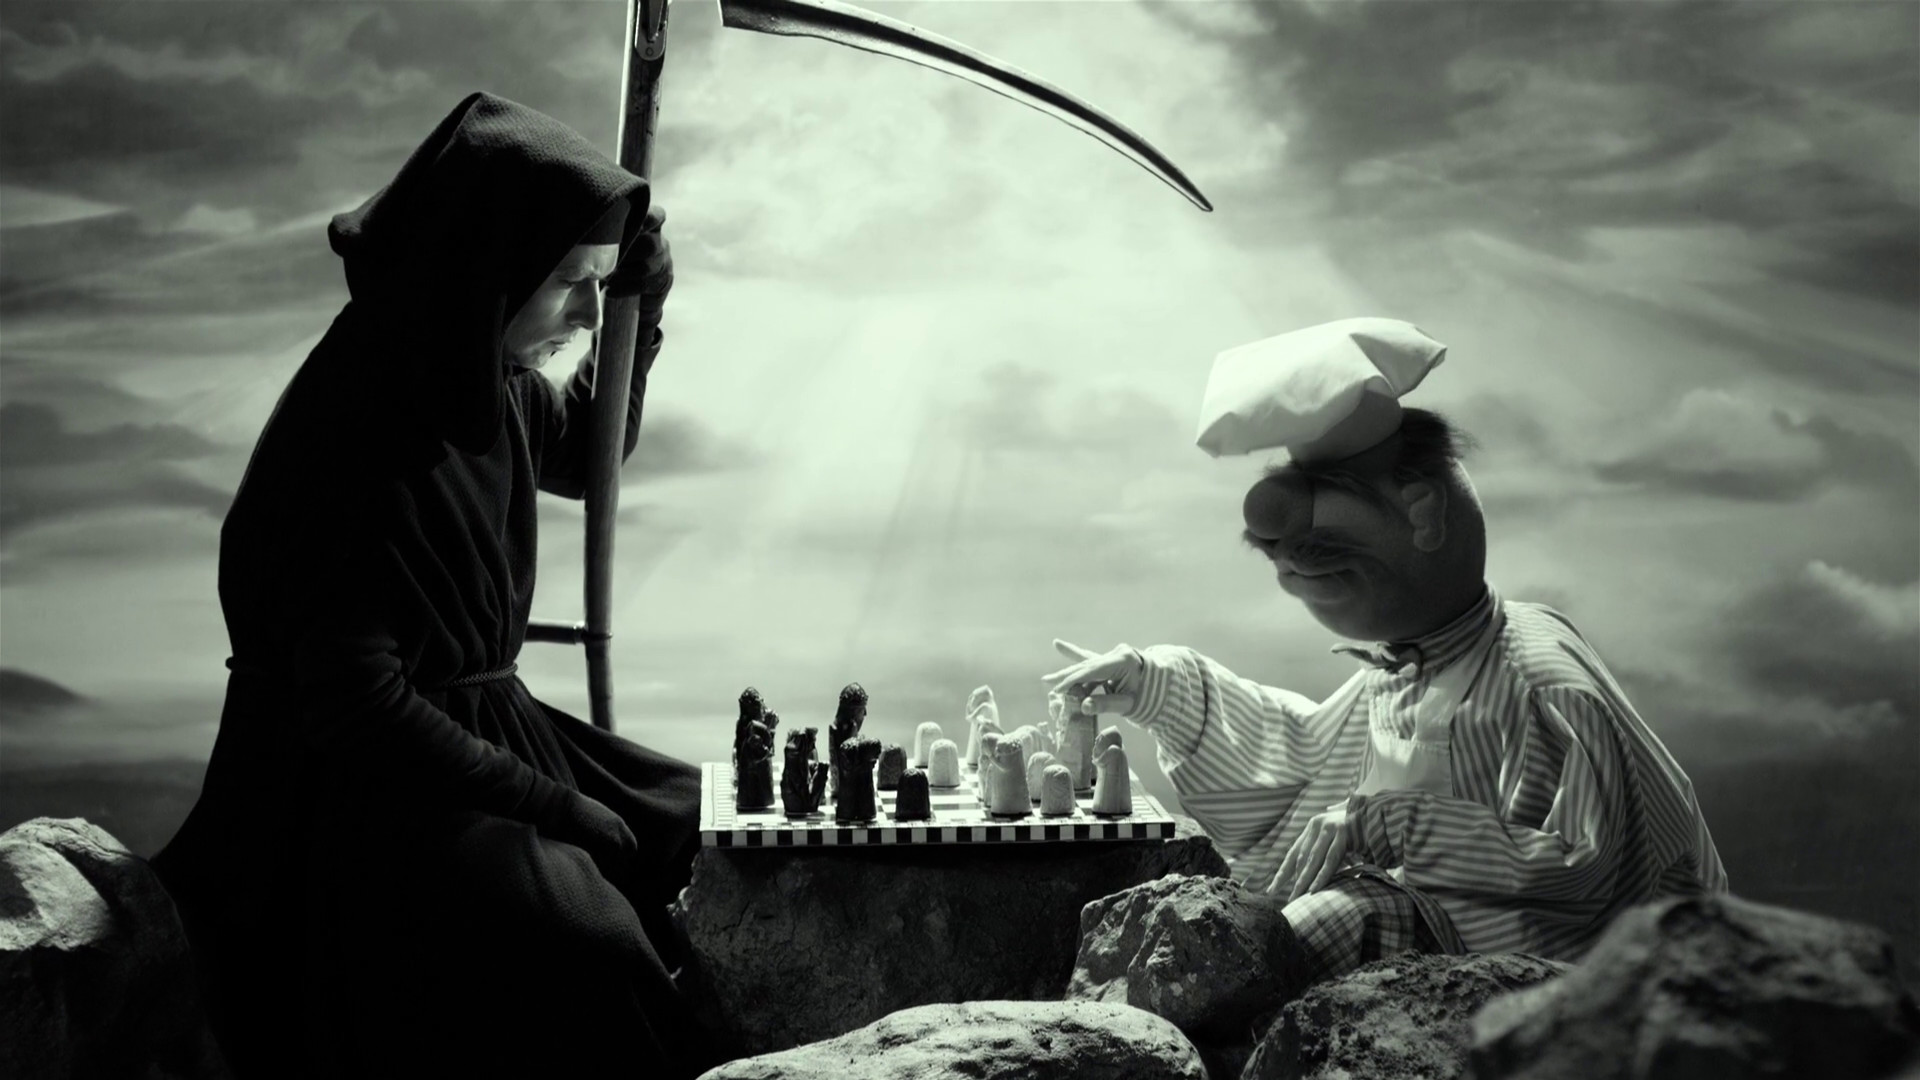 1920x1080 Related Wallpapers. Grim Reaper In Seventh Seal Movie